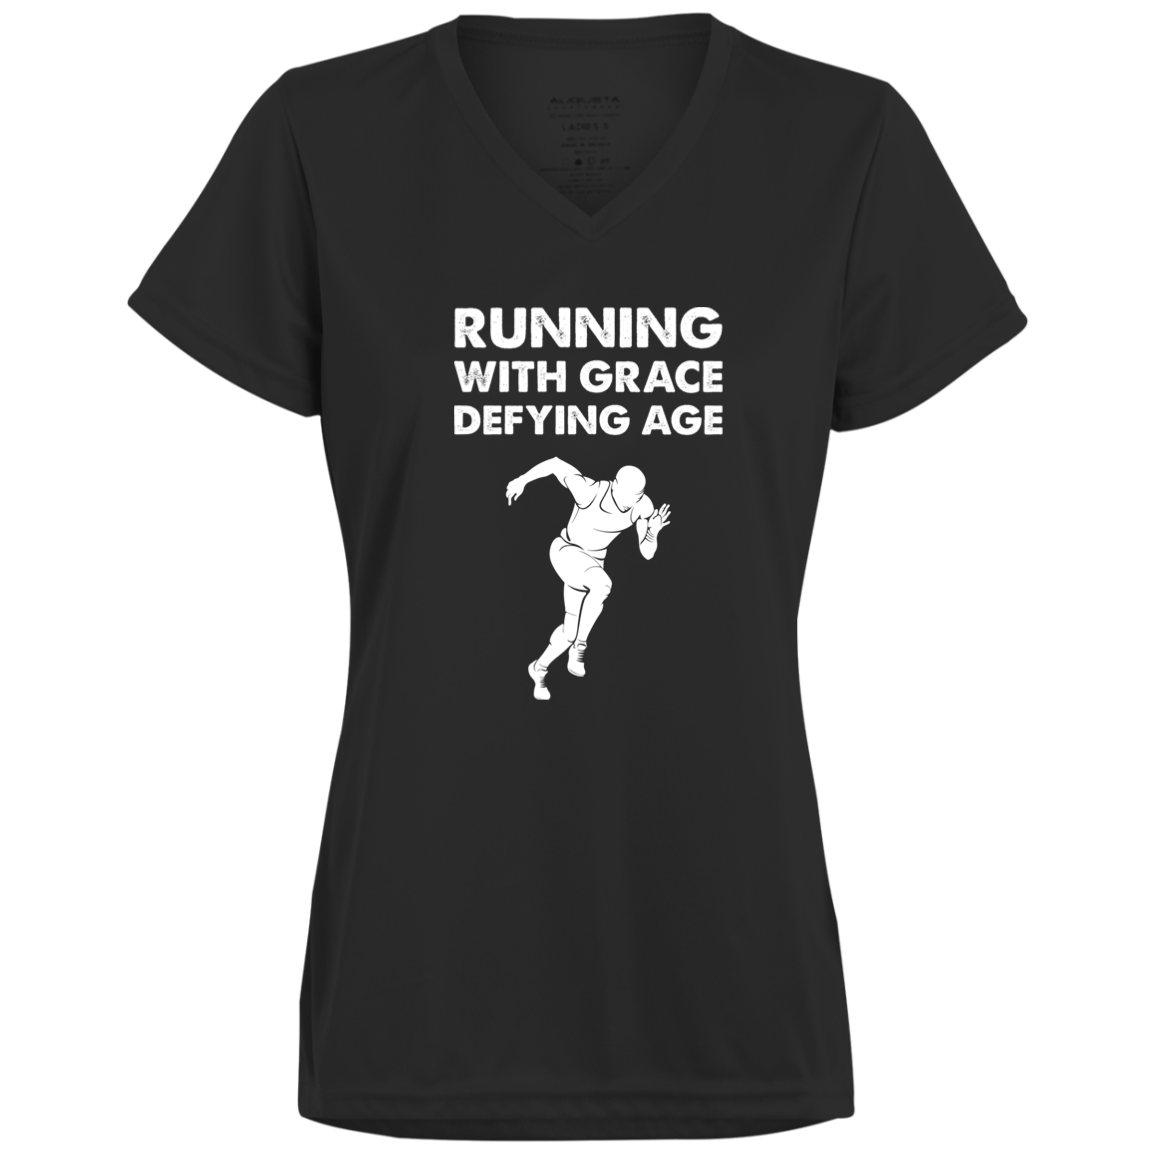 Women's Inspirational Top Running with grace, defying age